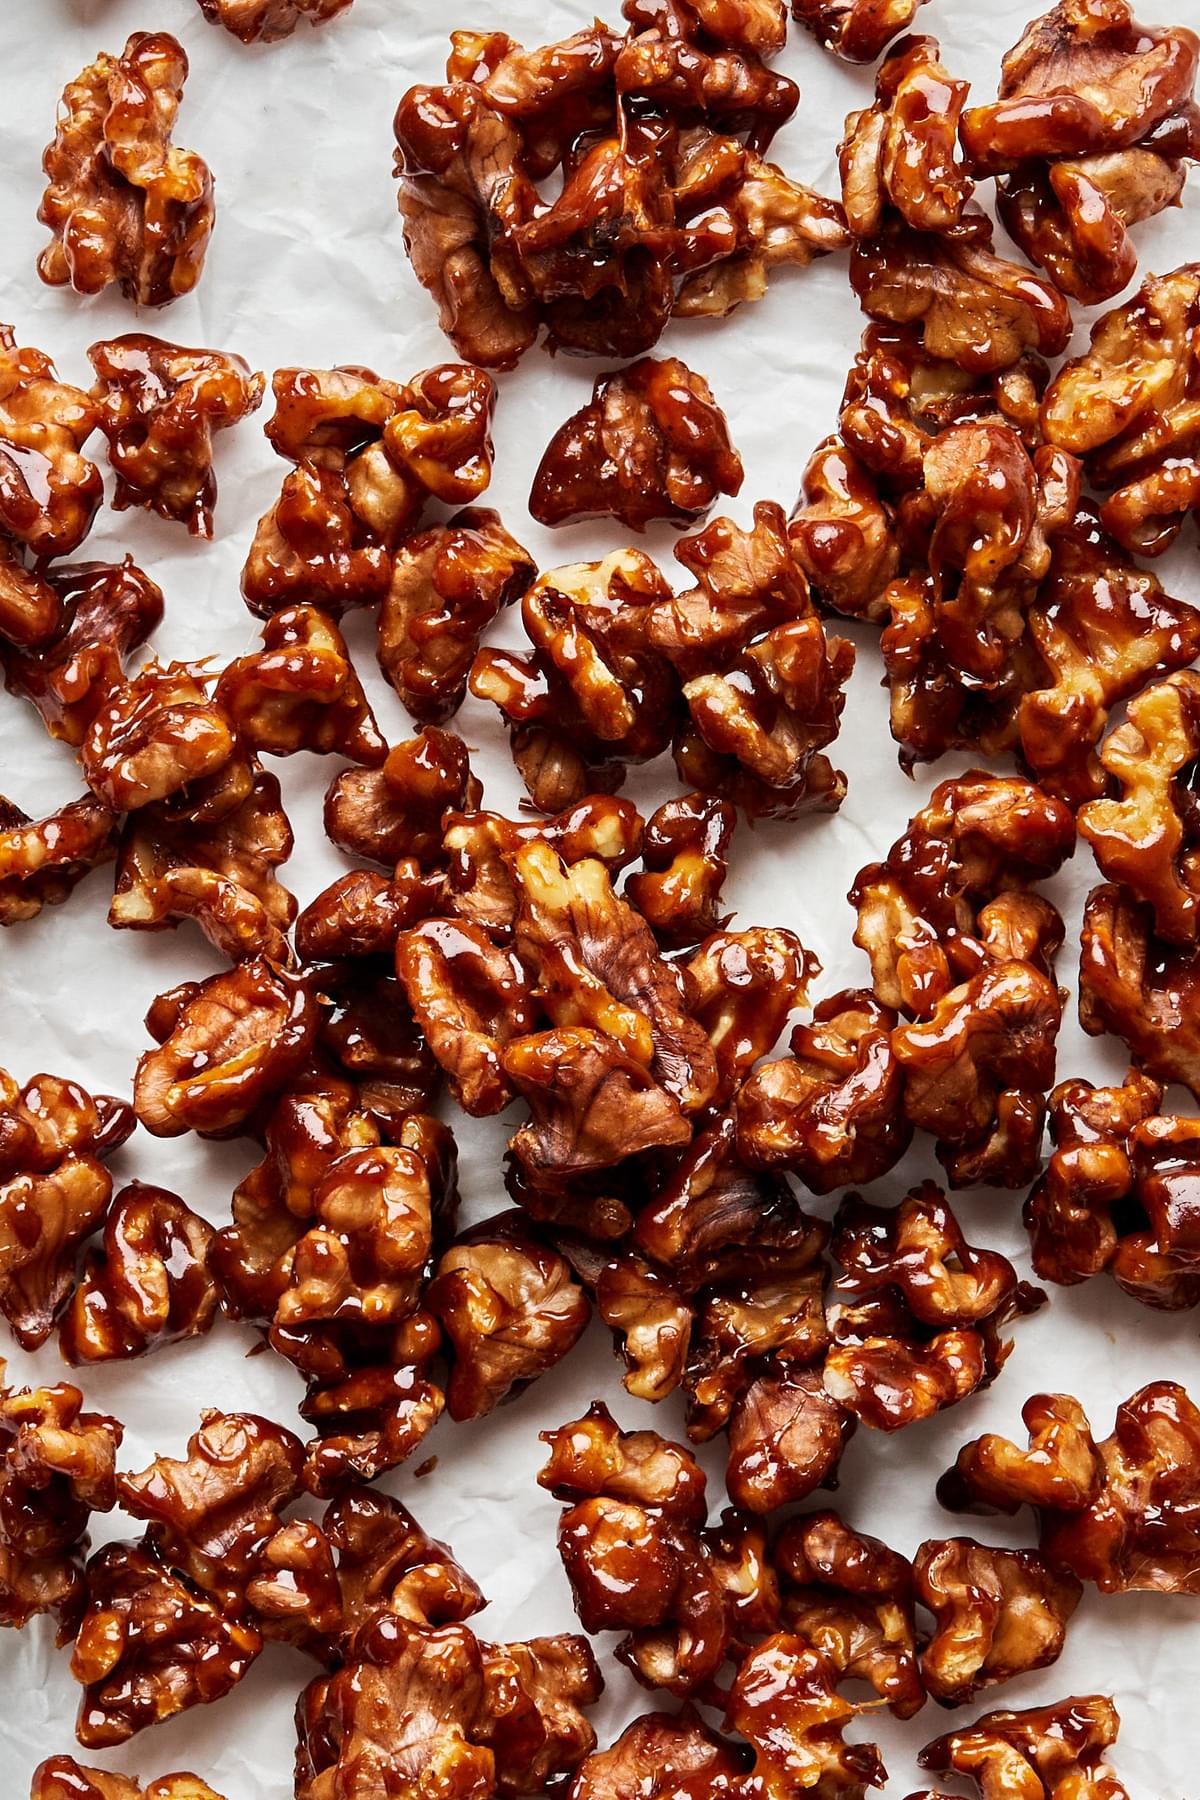 homemade candied walnuts made with brown sugar, butter, salt and cayenne